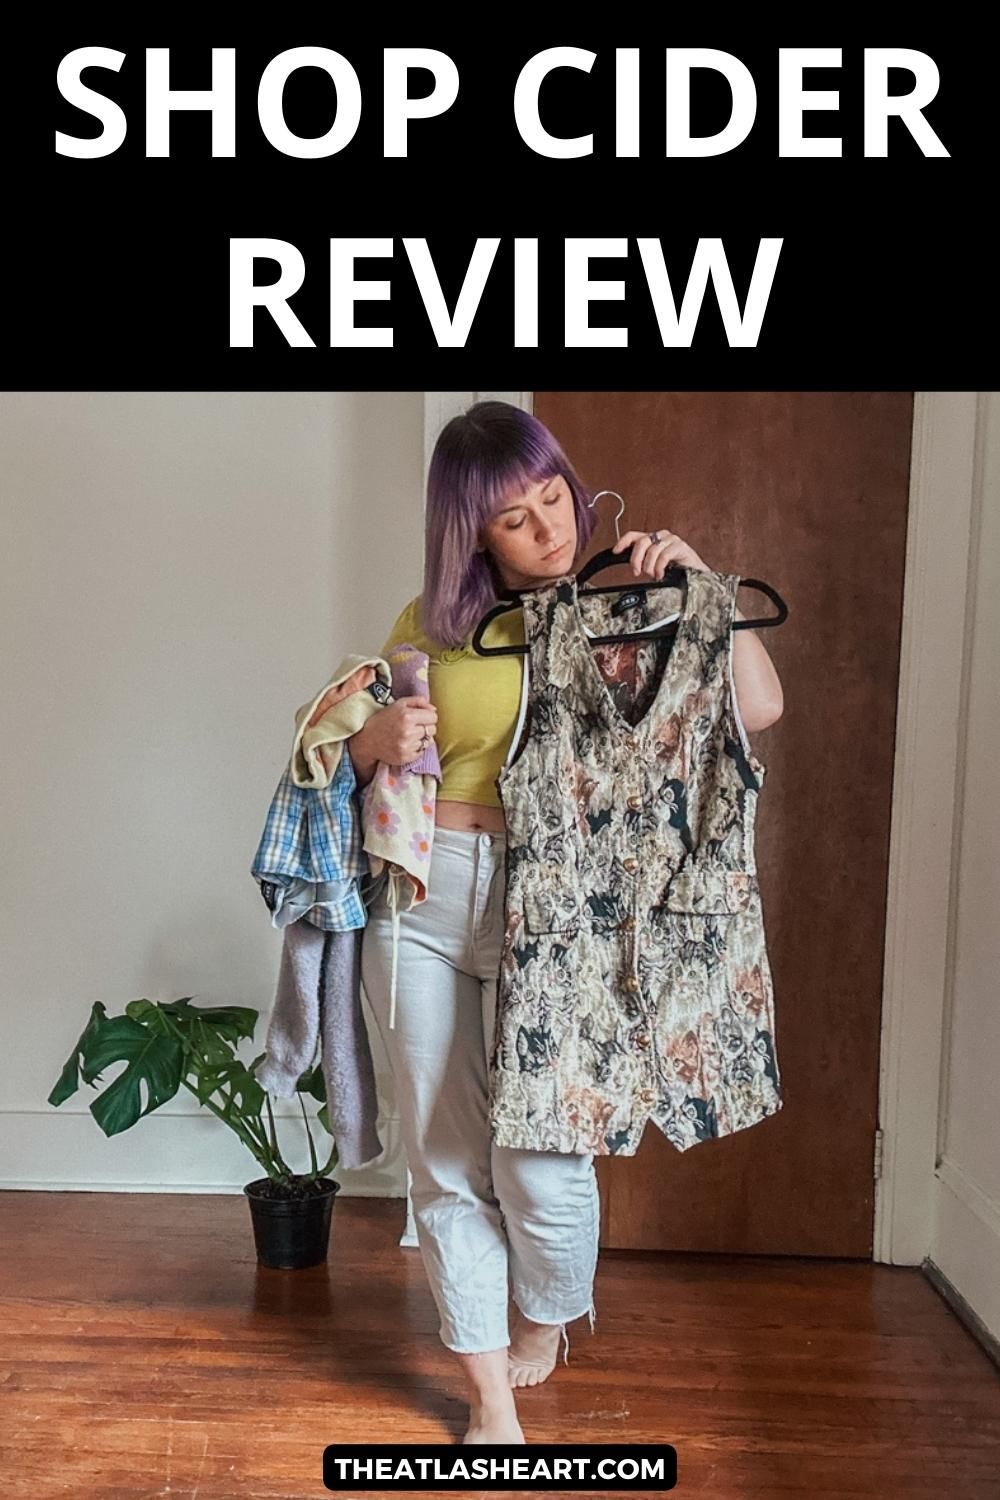 A sparse apartment interior with a woman with purple hair wearing a yellow shirt holding a stack of clothing and a brown dress on a hanger up to her body with the text overlay, "Shop Cider Review."